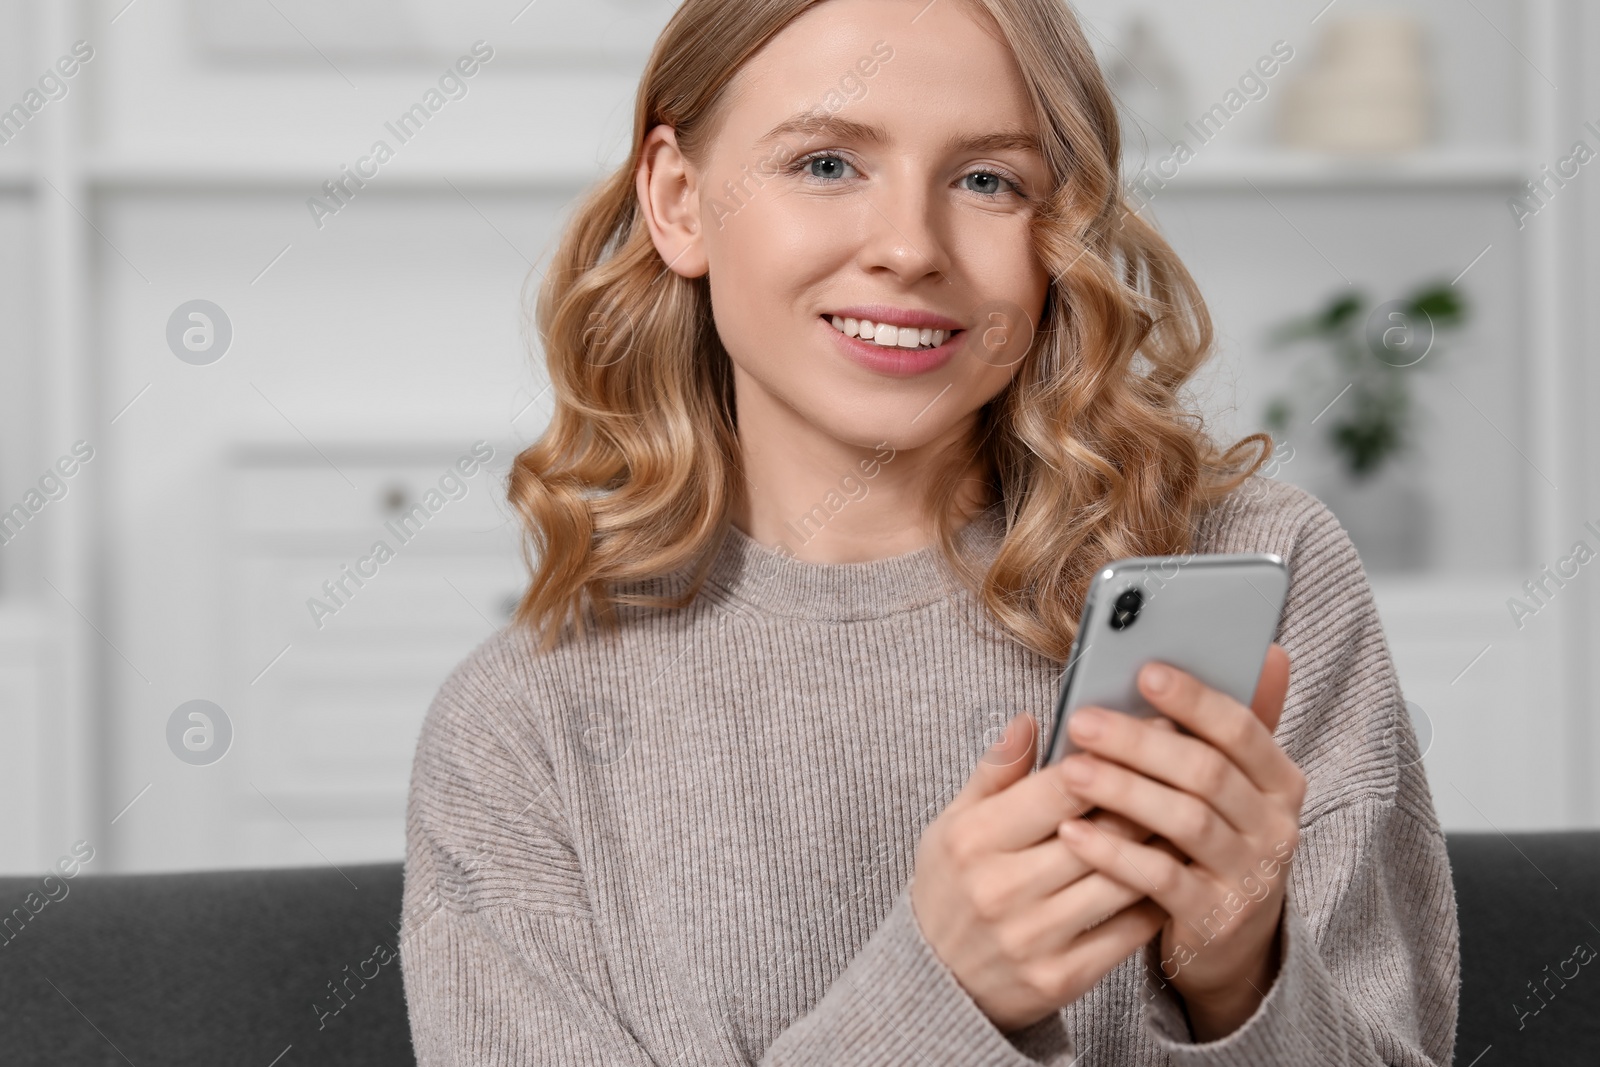 Photo of Beautiful woman with blonde hair holding smartphone on sofa indoors